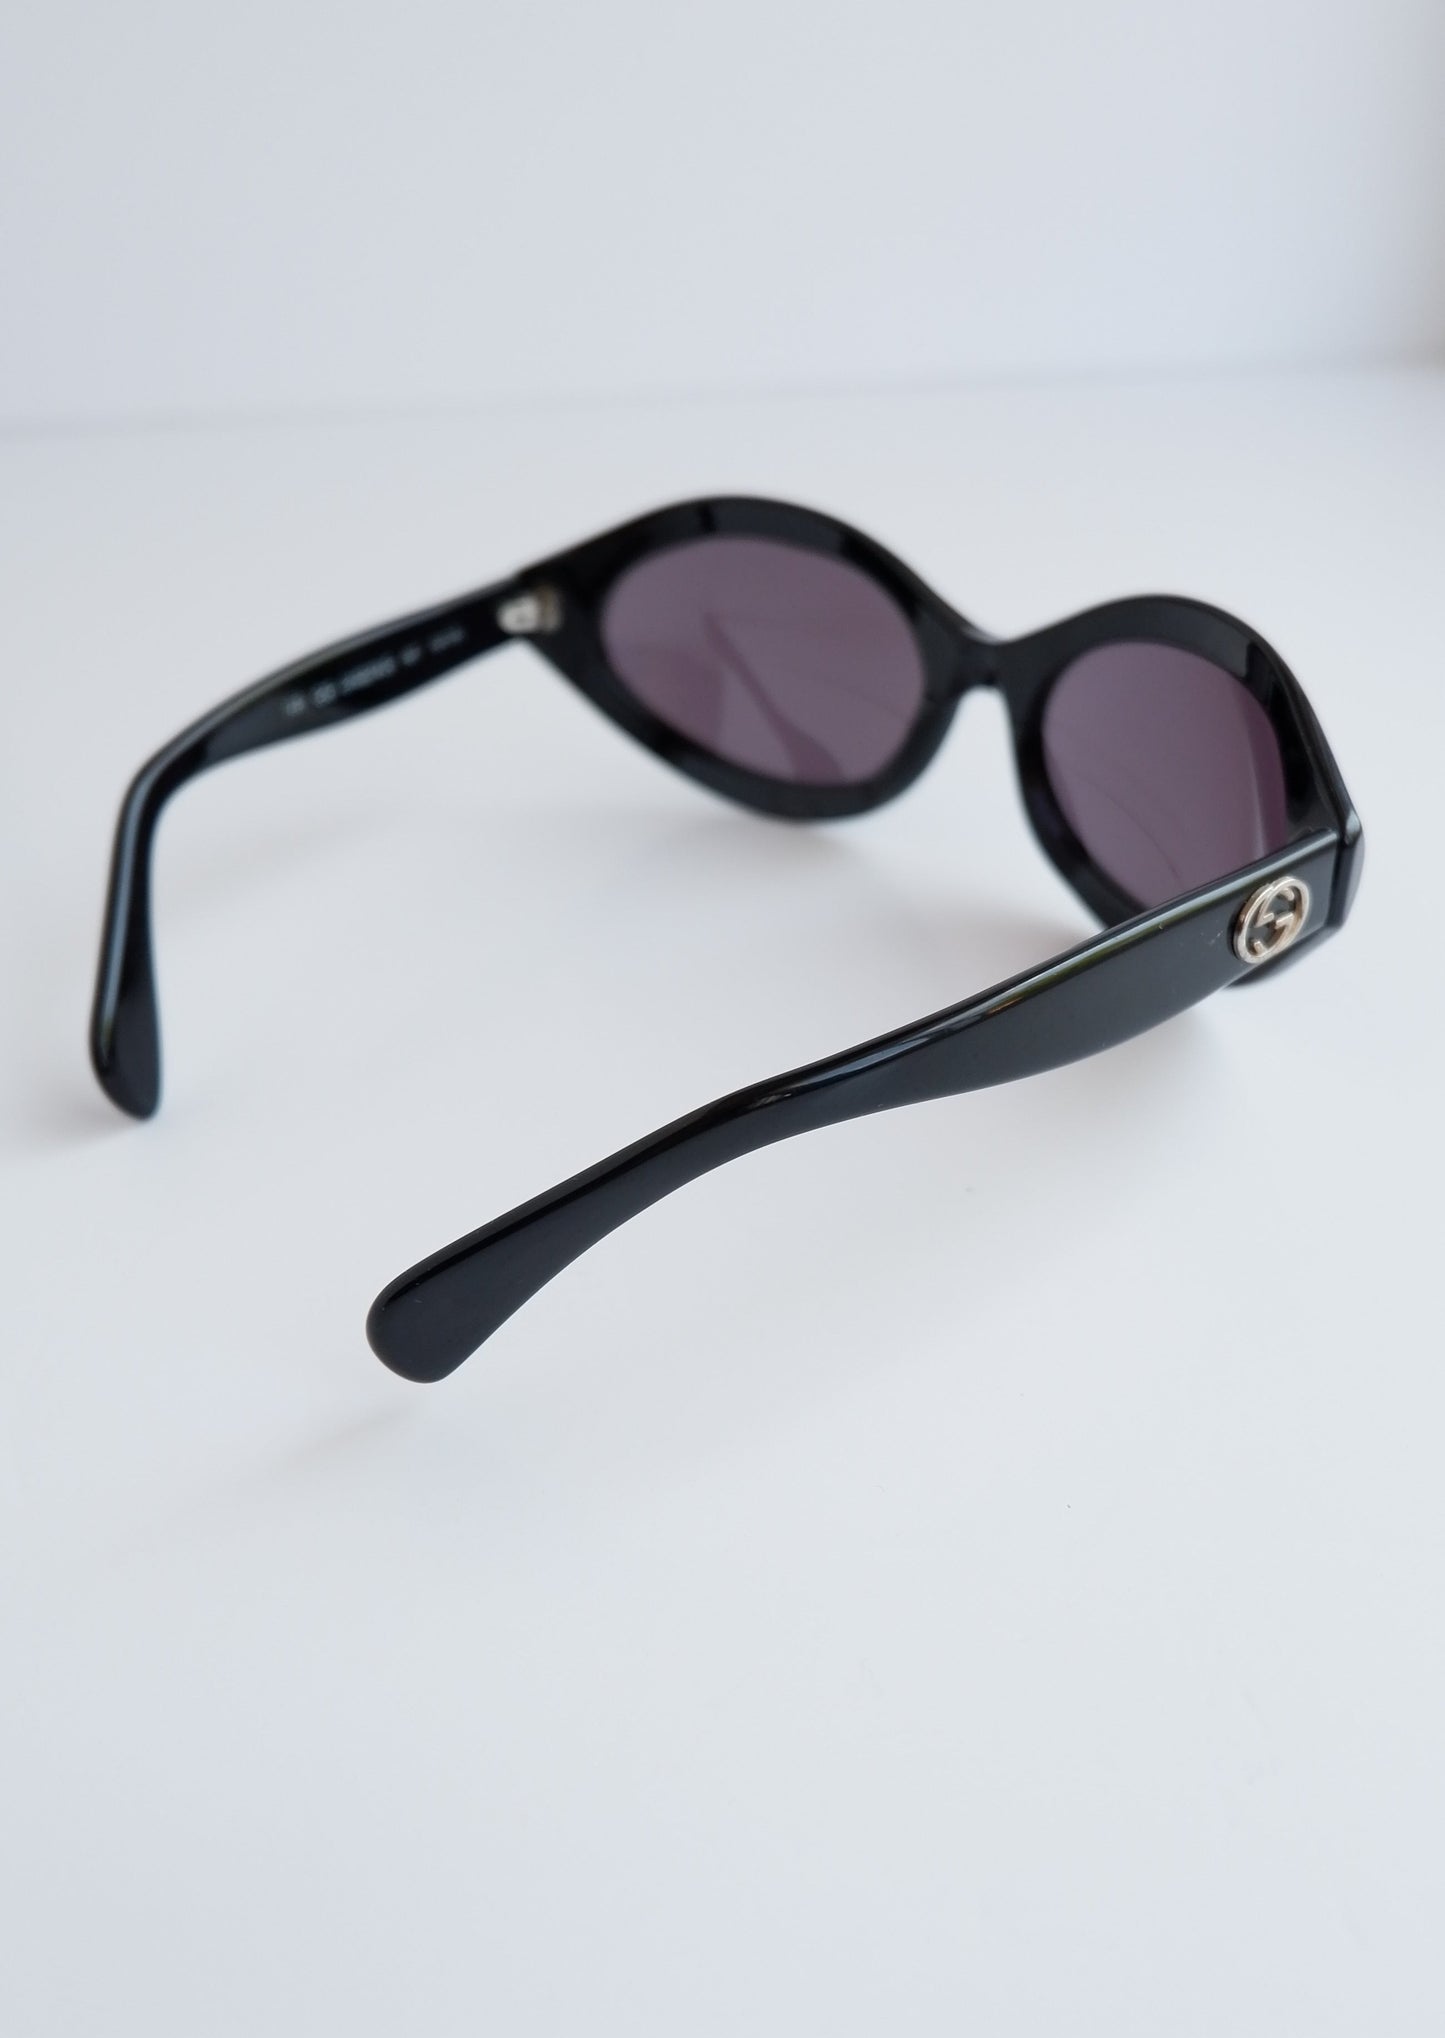 Authentic Preowned Vintage Gucci Black Round Frame Sunglasses